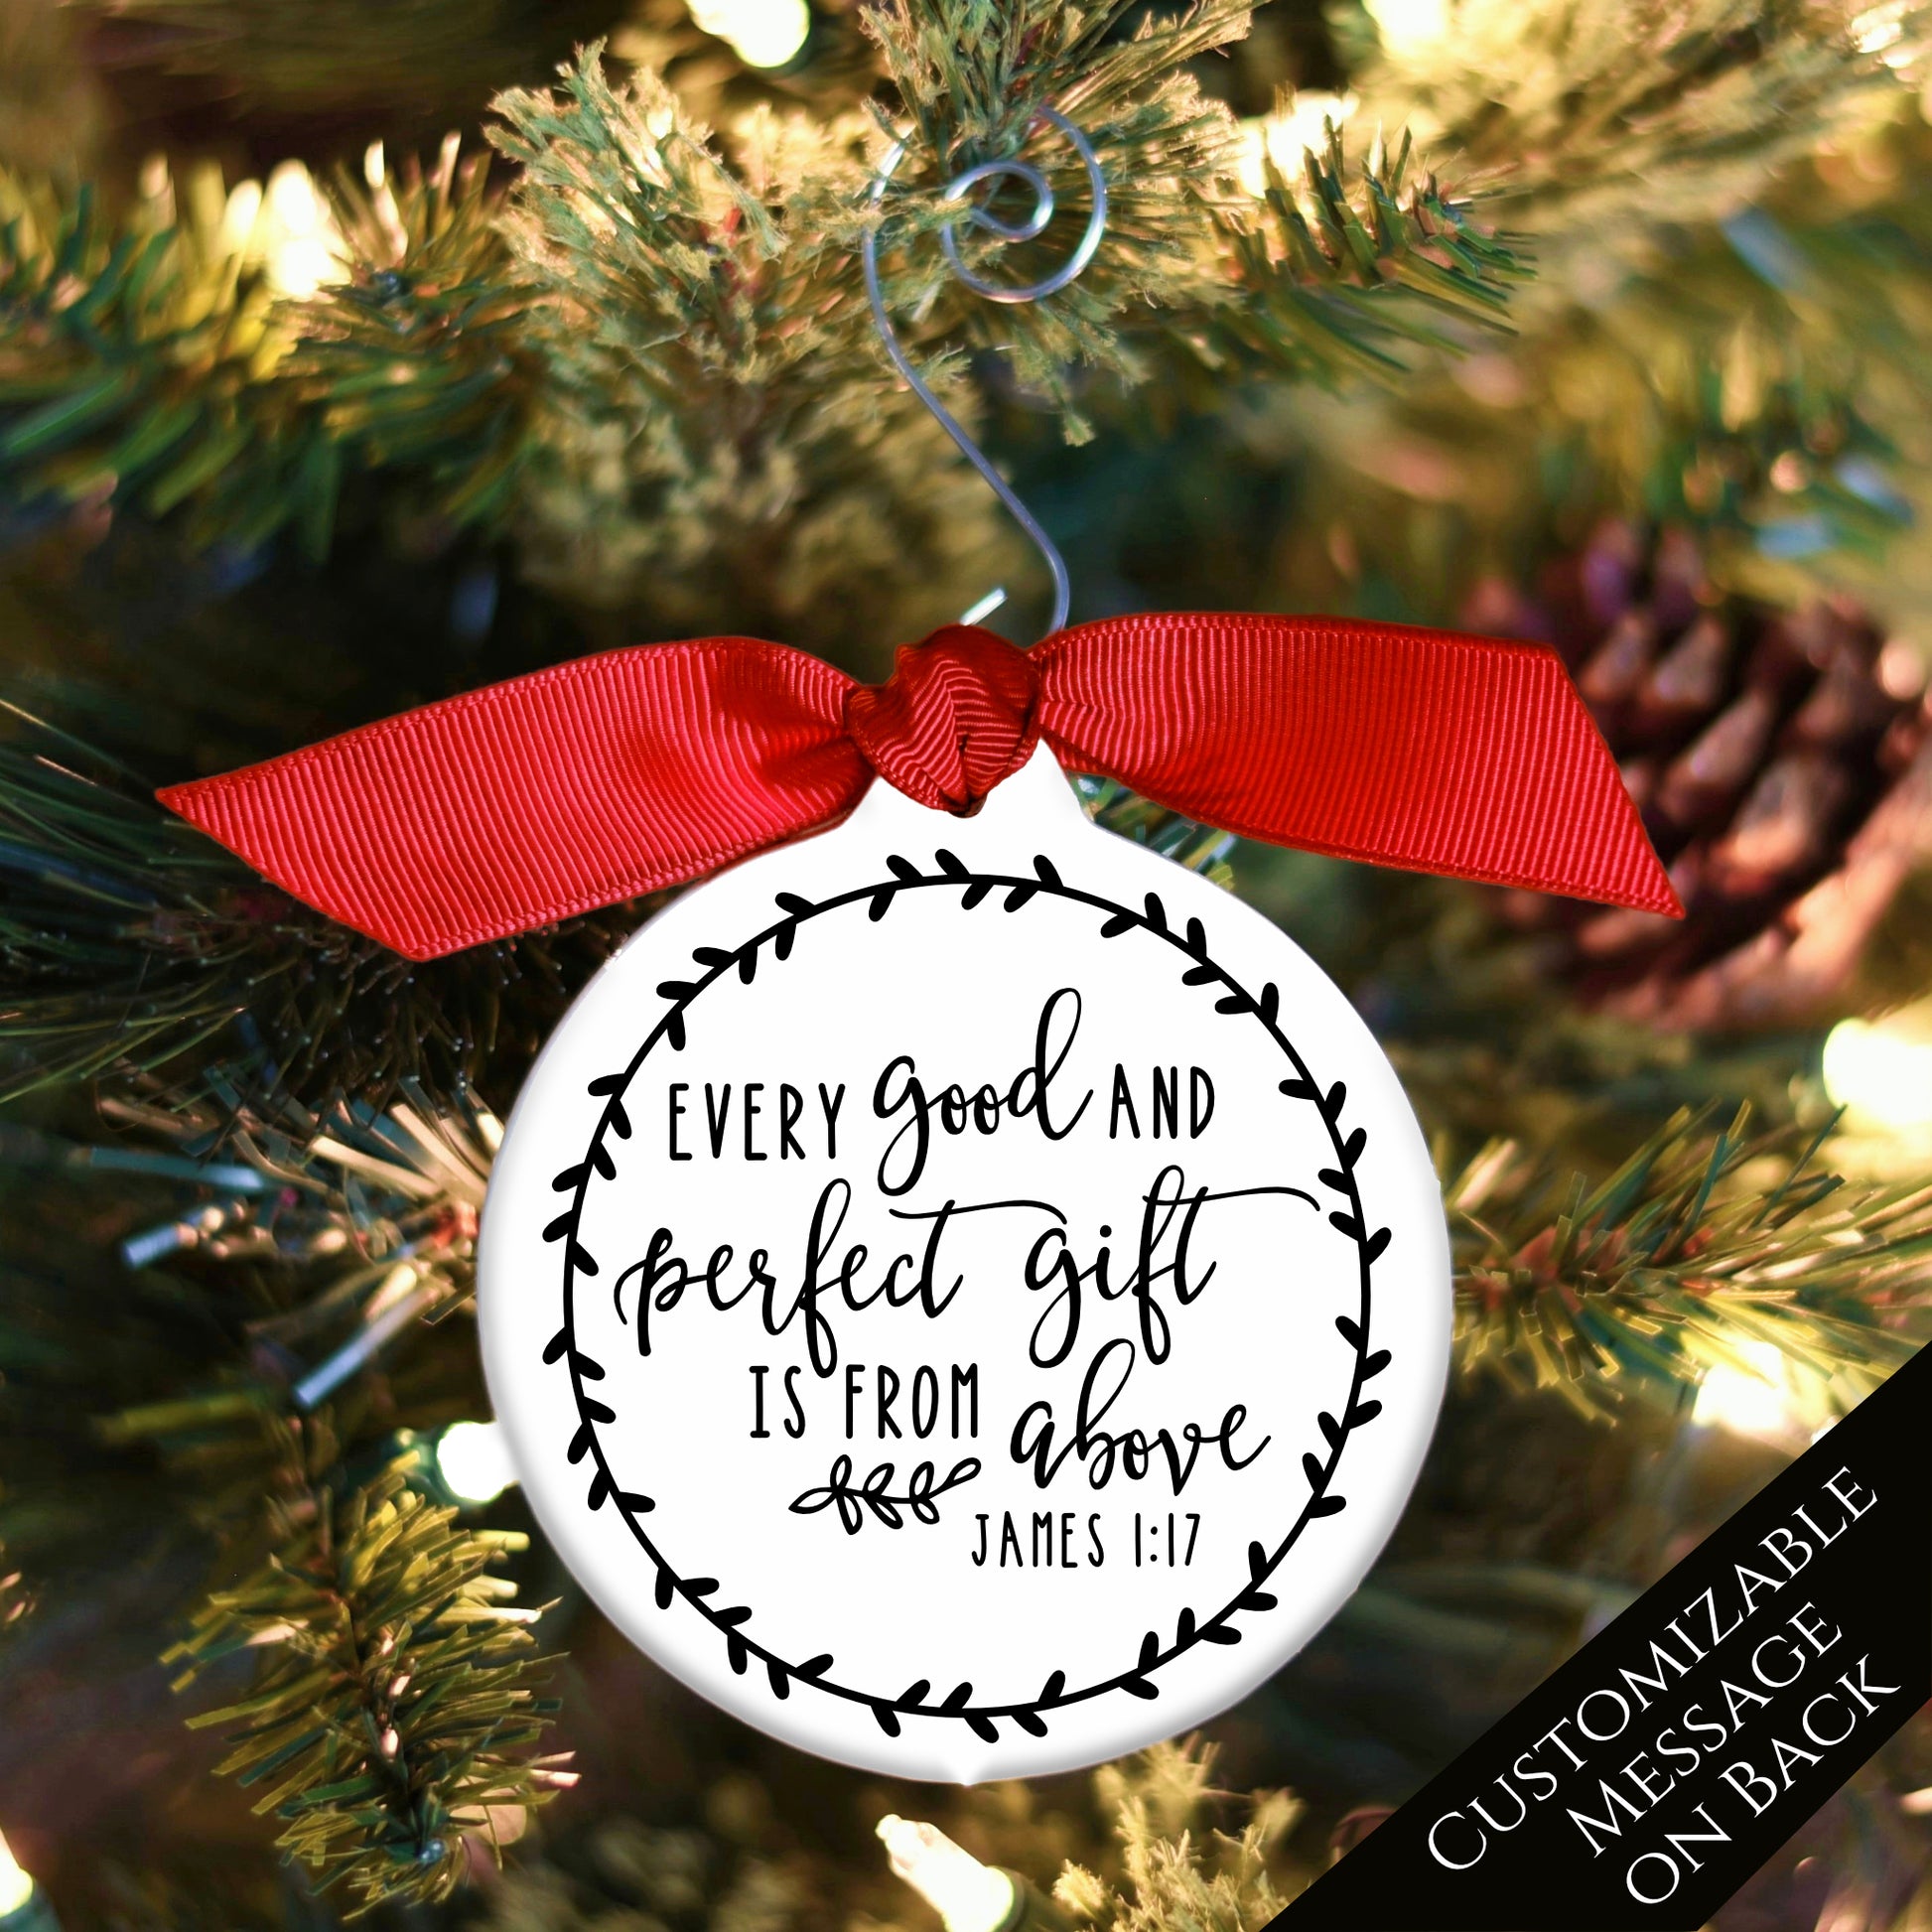 James 1:17, Every Good and Perfect Gift is From Above, Christmas Ornament, Bible Verse, Personalized, Custom, Christian Gift, Tree Decor - Red Ribbon